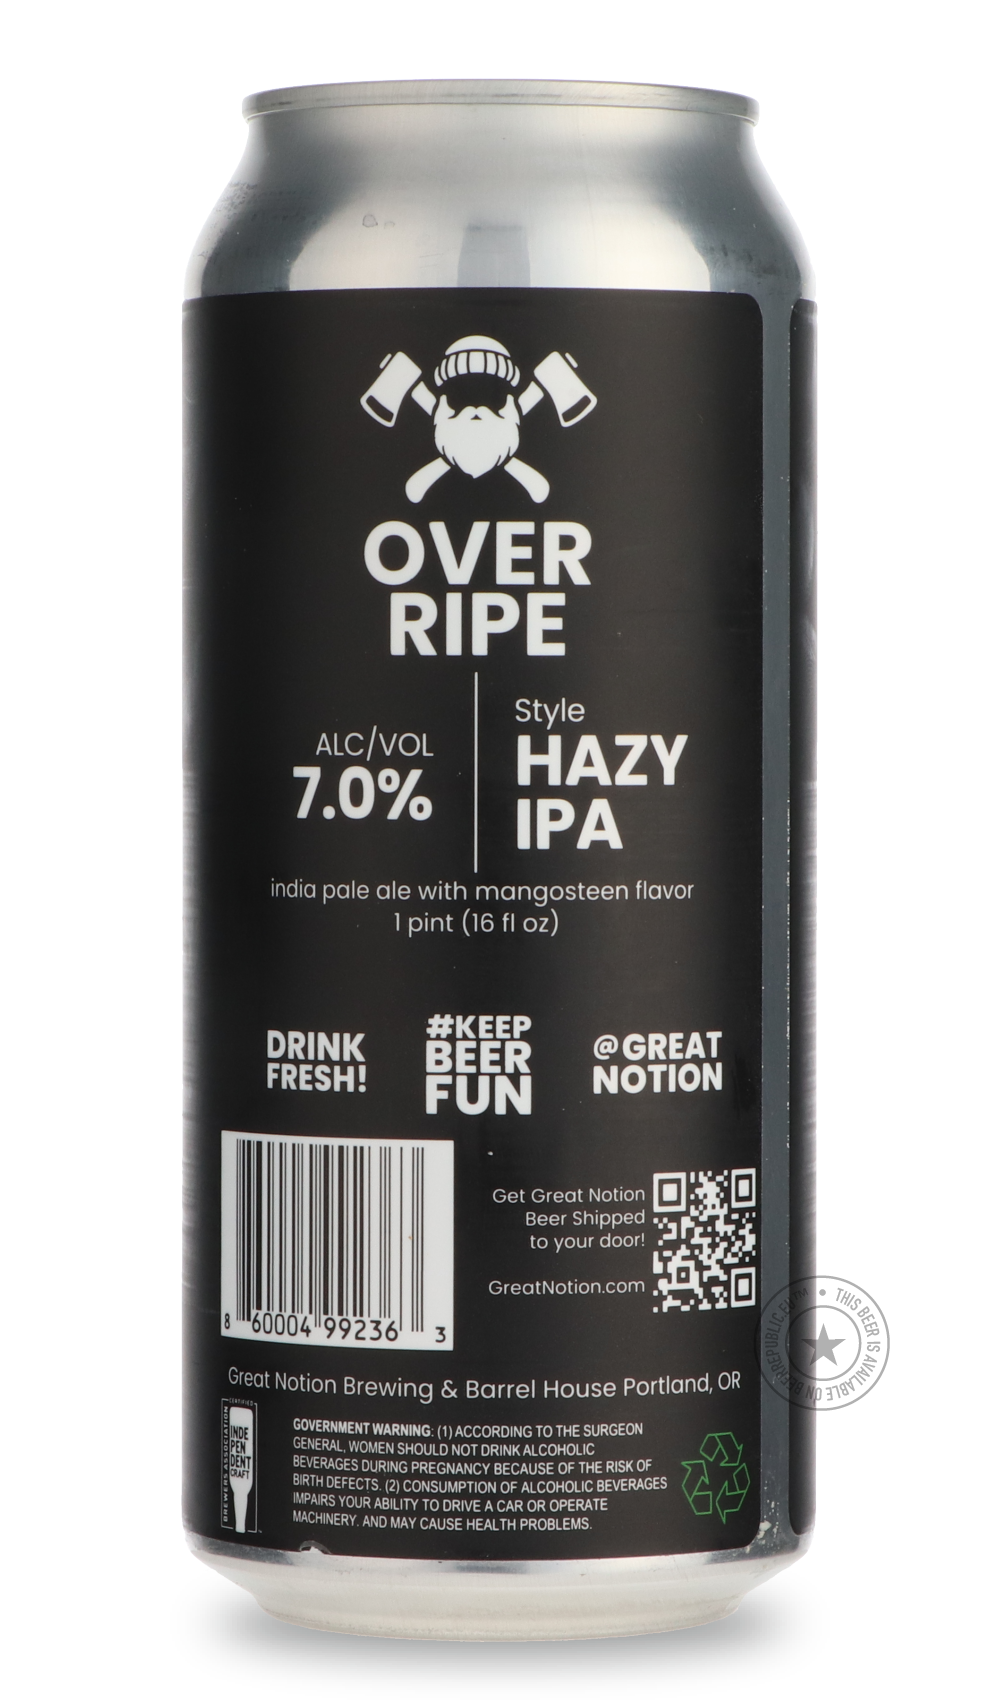 -Great Notion- Over Ripe-IPA- Only @ Beer Republic - The best online beer store for American & Canadian craft beer - Buy beer online from the USA and Canada - Bier online kopen - Amerikaans bier kopen - Craft beer store - Craft beer kopen - Amerikanisch bier kaufen - Bier online kaufen - Acheter biere online - IPA - Stout - Porter - New England IPA - Hazy IPA - Imperial Stout - Barrel Aged - Barrel Aged Imperial Stout - Brown - Dark beer - Blond - Blonde - Pilsner - Lager - Wheat - Weizen - Amber - Barley W